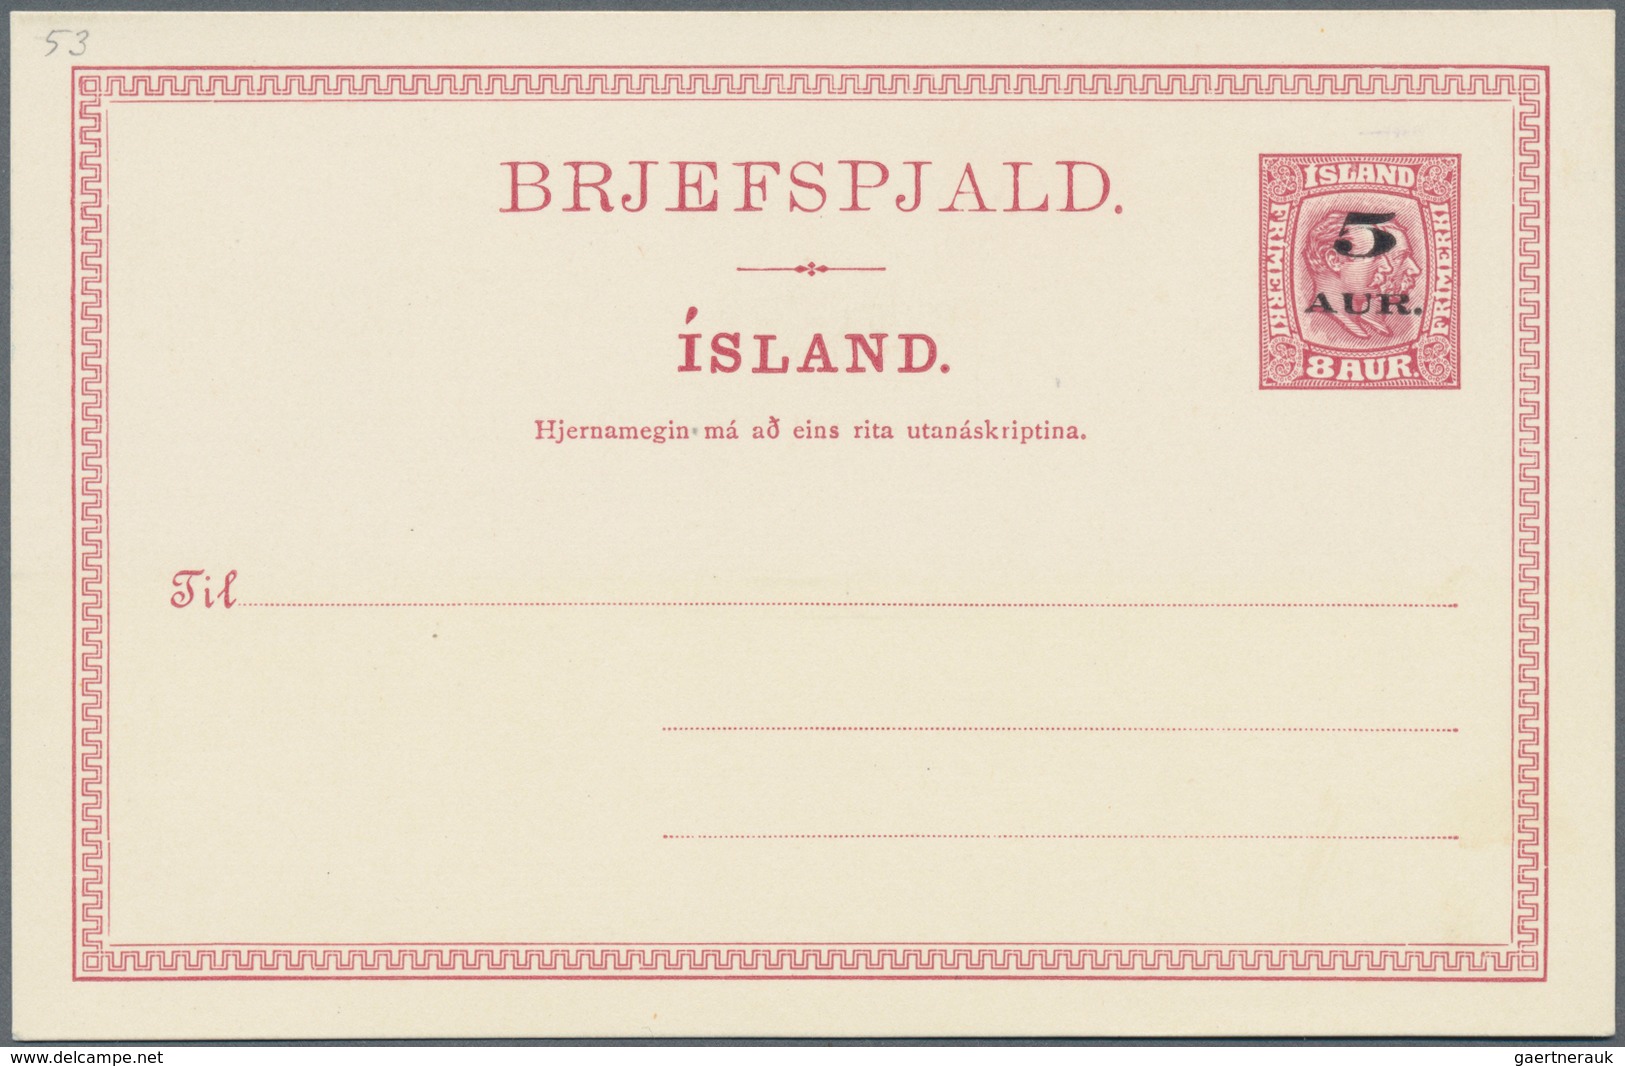 Island - Ganzsachen: 1919, 8 Aur Double Kings Stationery Card Unsed Overprinted With New Value "5 Au - Postal Stationery